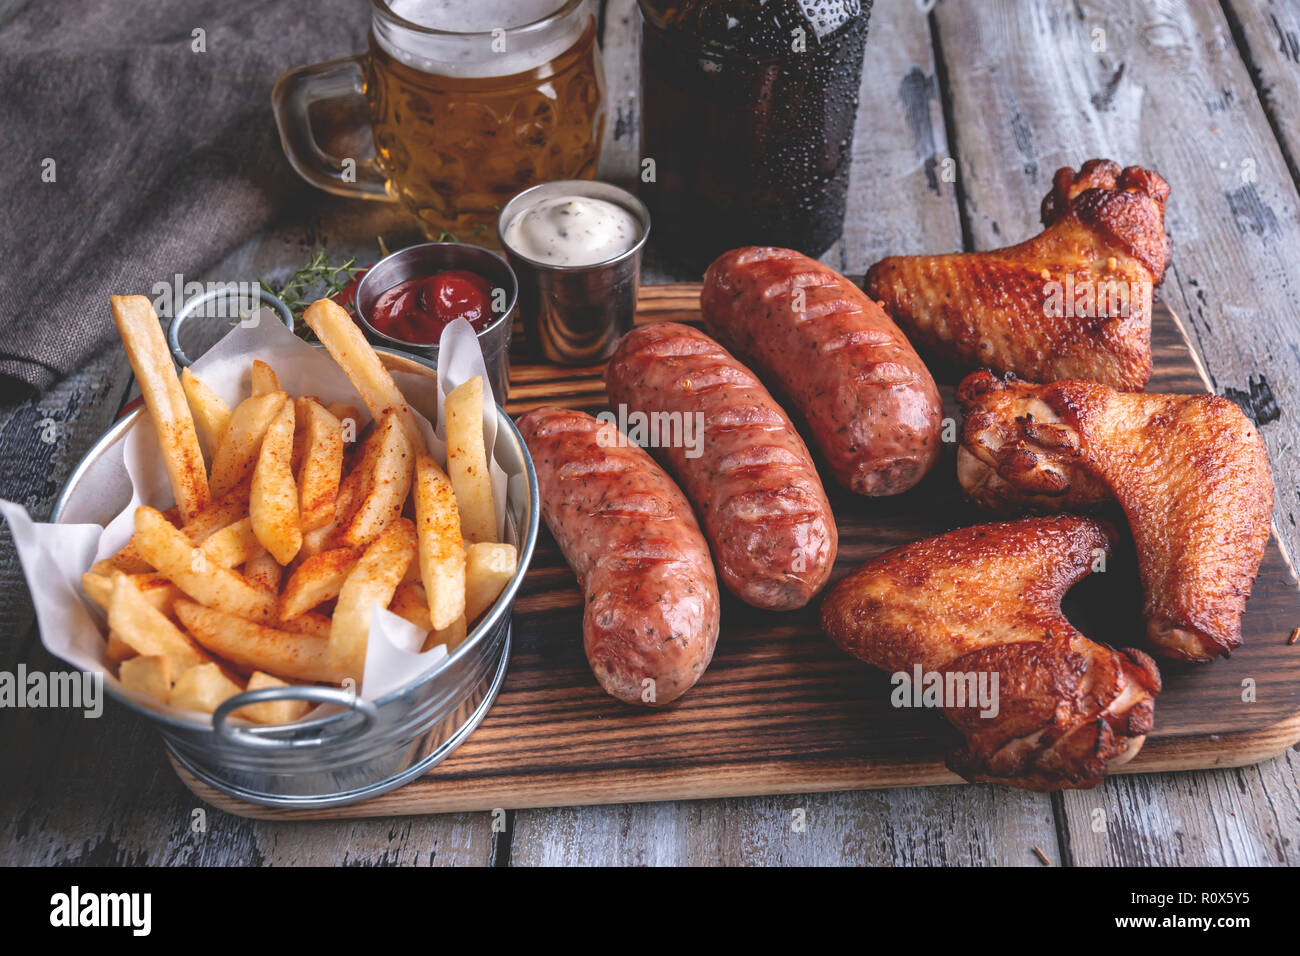 Fried chicken wings,grilled sausages, french fries, white and red sauce. food to beer Stock Photo